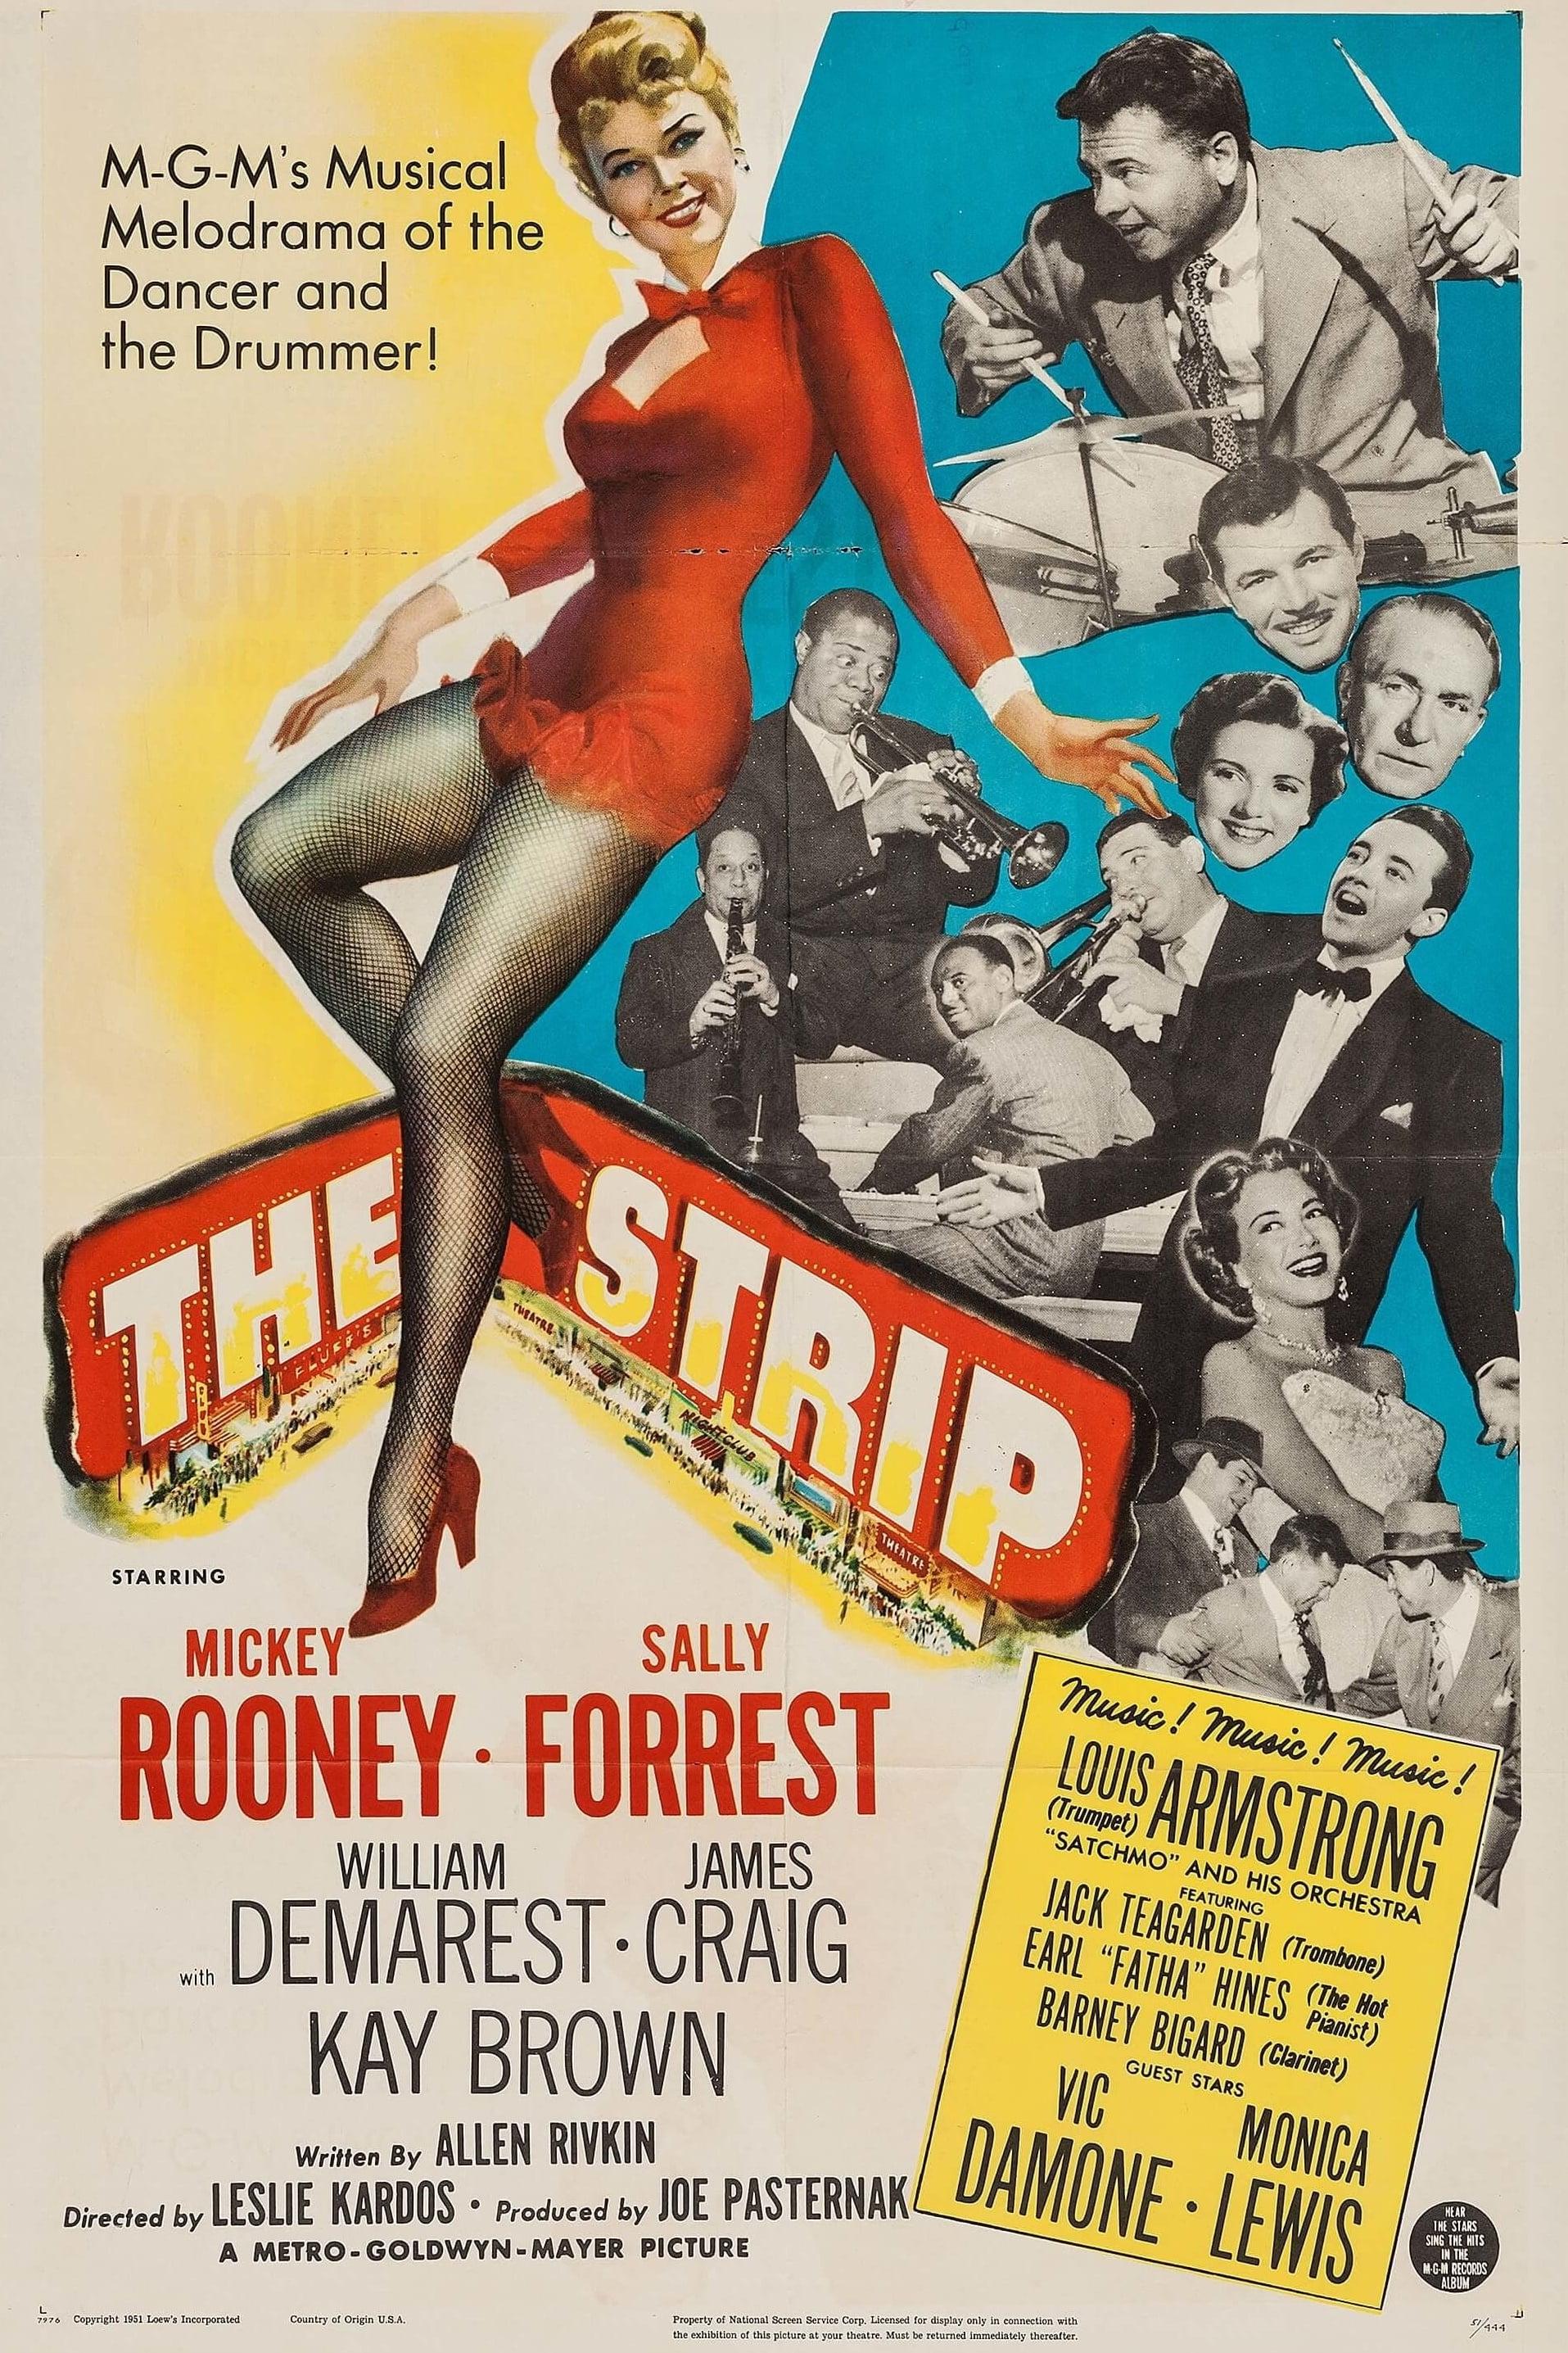 The Strip poster